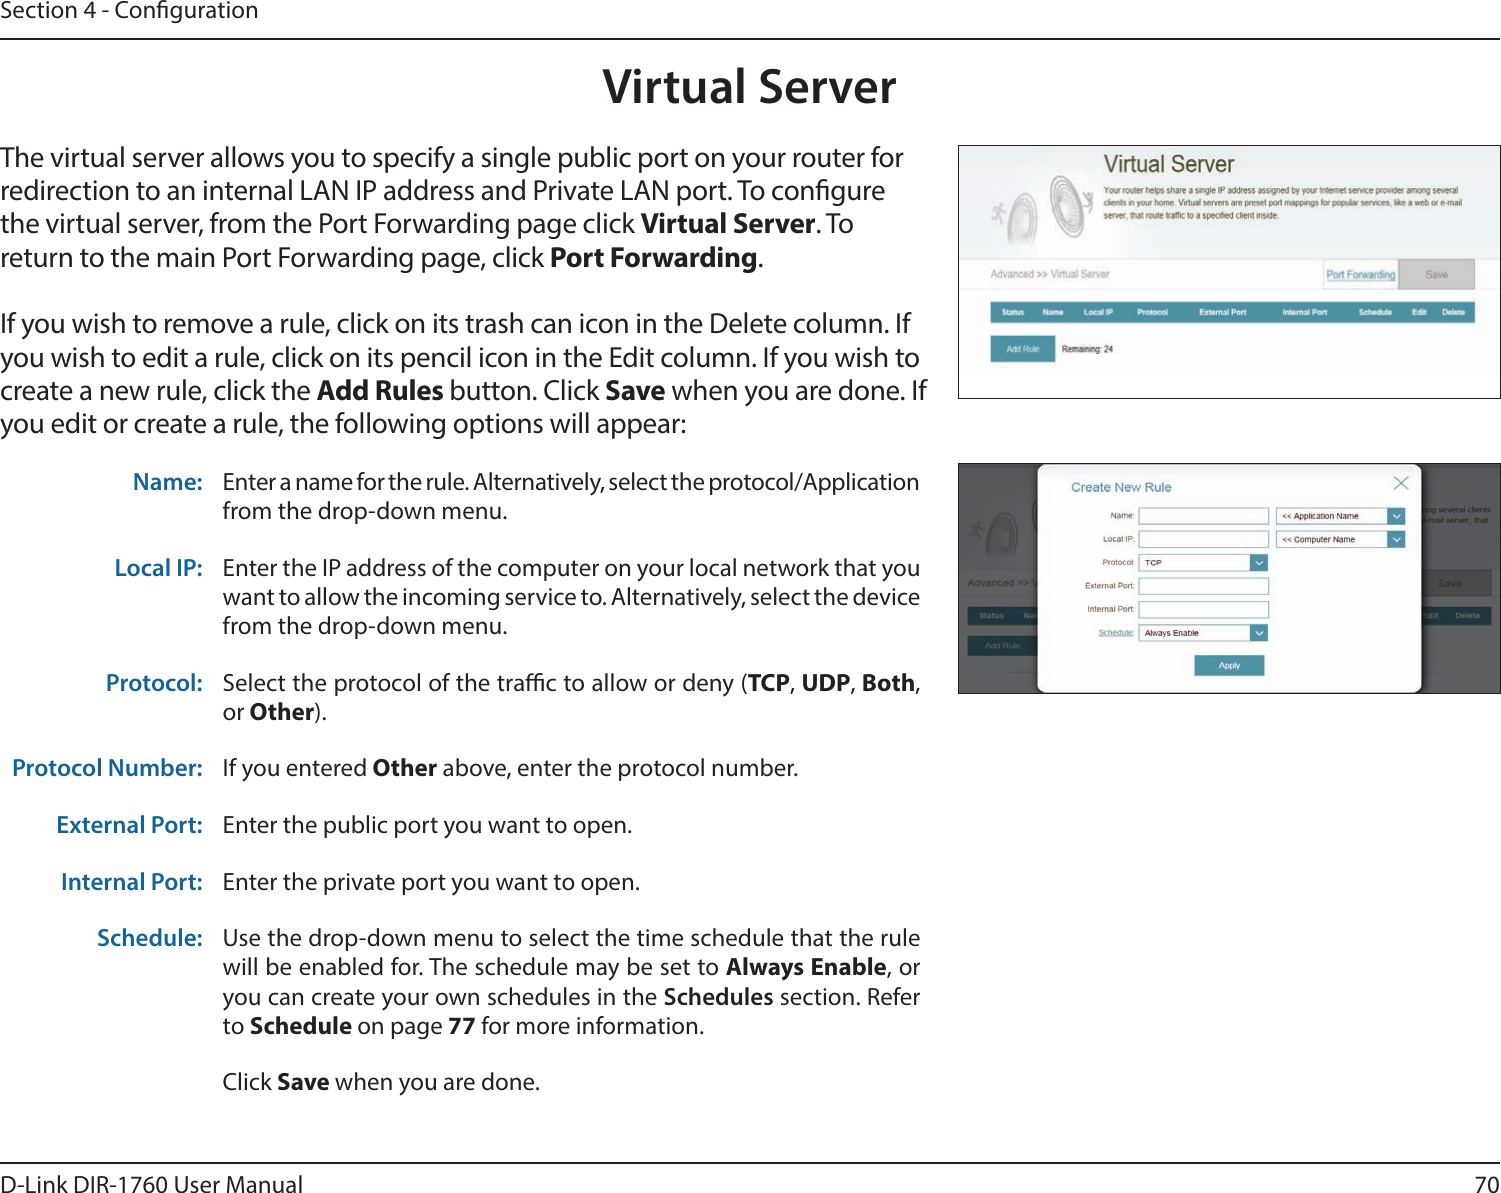 70D-Link DIR-1760 User ManualSection 4 - CongurationVirtual ServerThe virtual server allows you to specify a single public port on your router for redirection to an internal LAN IP address and Private LAN port. To congure the virtual server, from the Port Forwarding page click Virtual Server. To return to the main Port Forwarding page, click Port Forwarding.If you wish to remove a rule, click on its trash can icon in the Delete column. If you wish to edit a rule, click on its pencil icon in the Edit column. If you wish to create a new rule, click the Add Rules button. Click Save when you are done. If you edit or create a rule, the following options will appear:Name: Enter a name for the rule. Alternatively, select the protocol/Application from the drop-down menu.Local IP: Enter the IP address of the computer on your local network that you want to allow the incoming service to. Alternatively, select the device from the drop-down menu.Protocol: Select the protocol of the trac to allow or deny (TCP, UDP, Both, or Other).Protocol Number: If you entered Other above, enter the protocol number.External Port: Enter the public port you want to open.Internal Port: Enter the private port you want to open.Schedule: Use the drop-down menu to select the time schedule that the rule will be enabled for. The schedule may be set to Always Enable, or you can create your own schedules in the Schedules section. Refer to Schedule on page 77 for more information.Click Save when you are done.